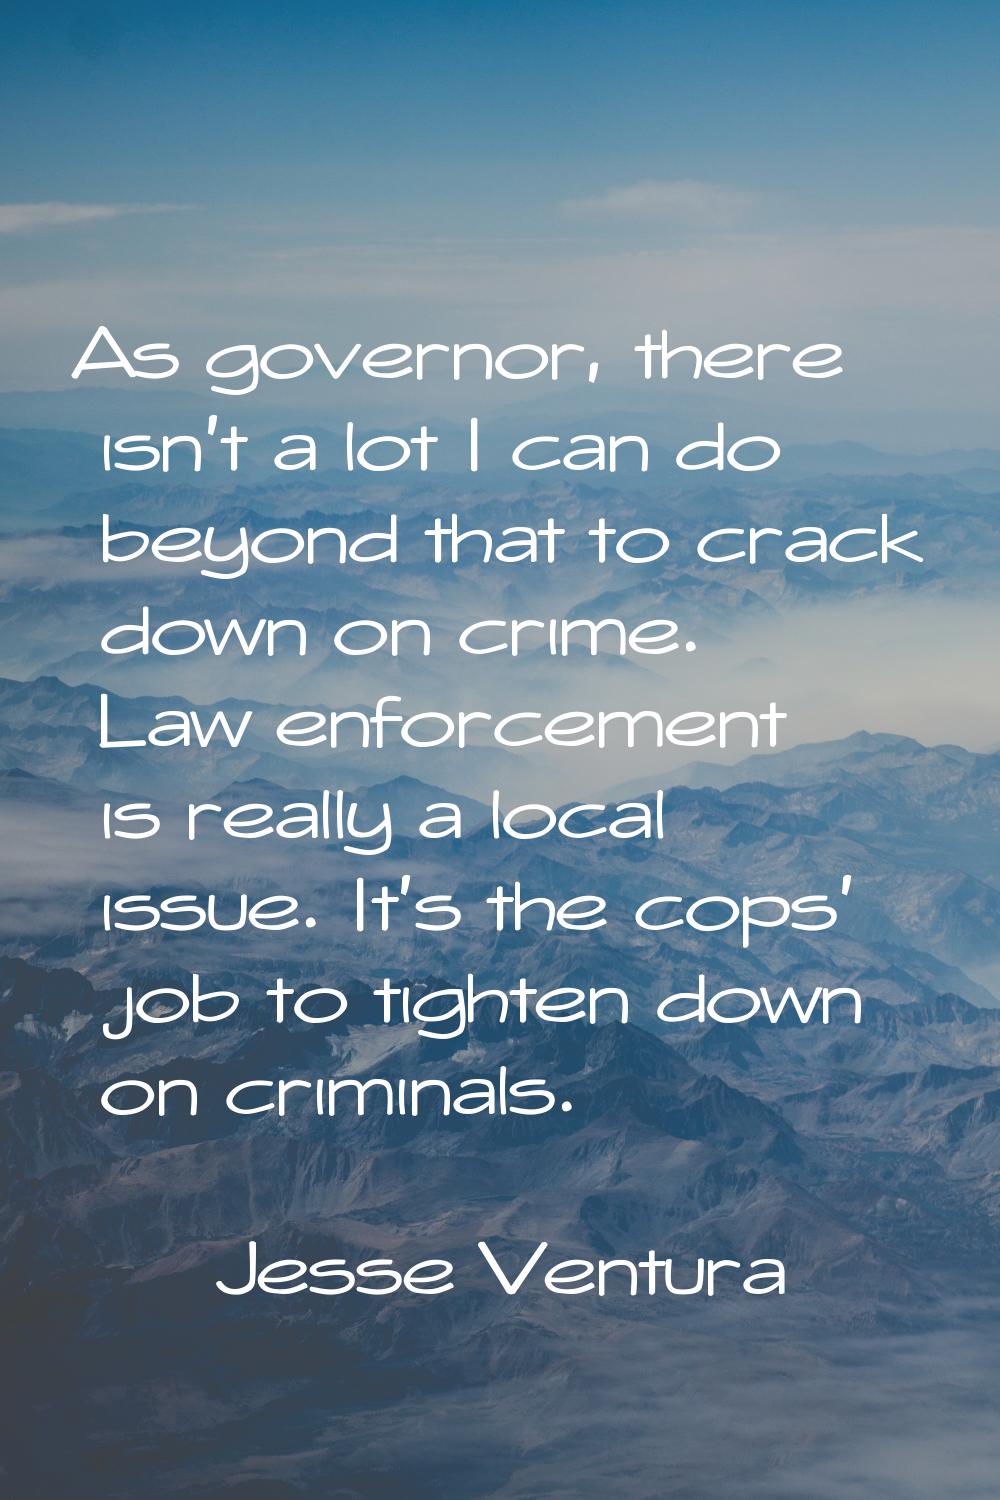 As governor, there isn't a lot I can do beyond that to crack down on crime. Law enforcement is real